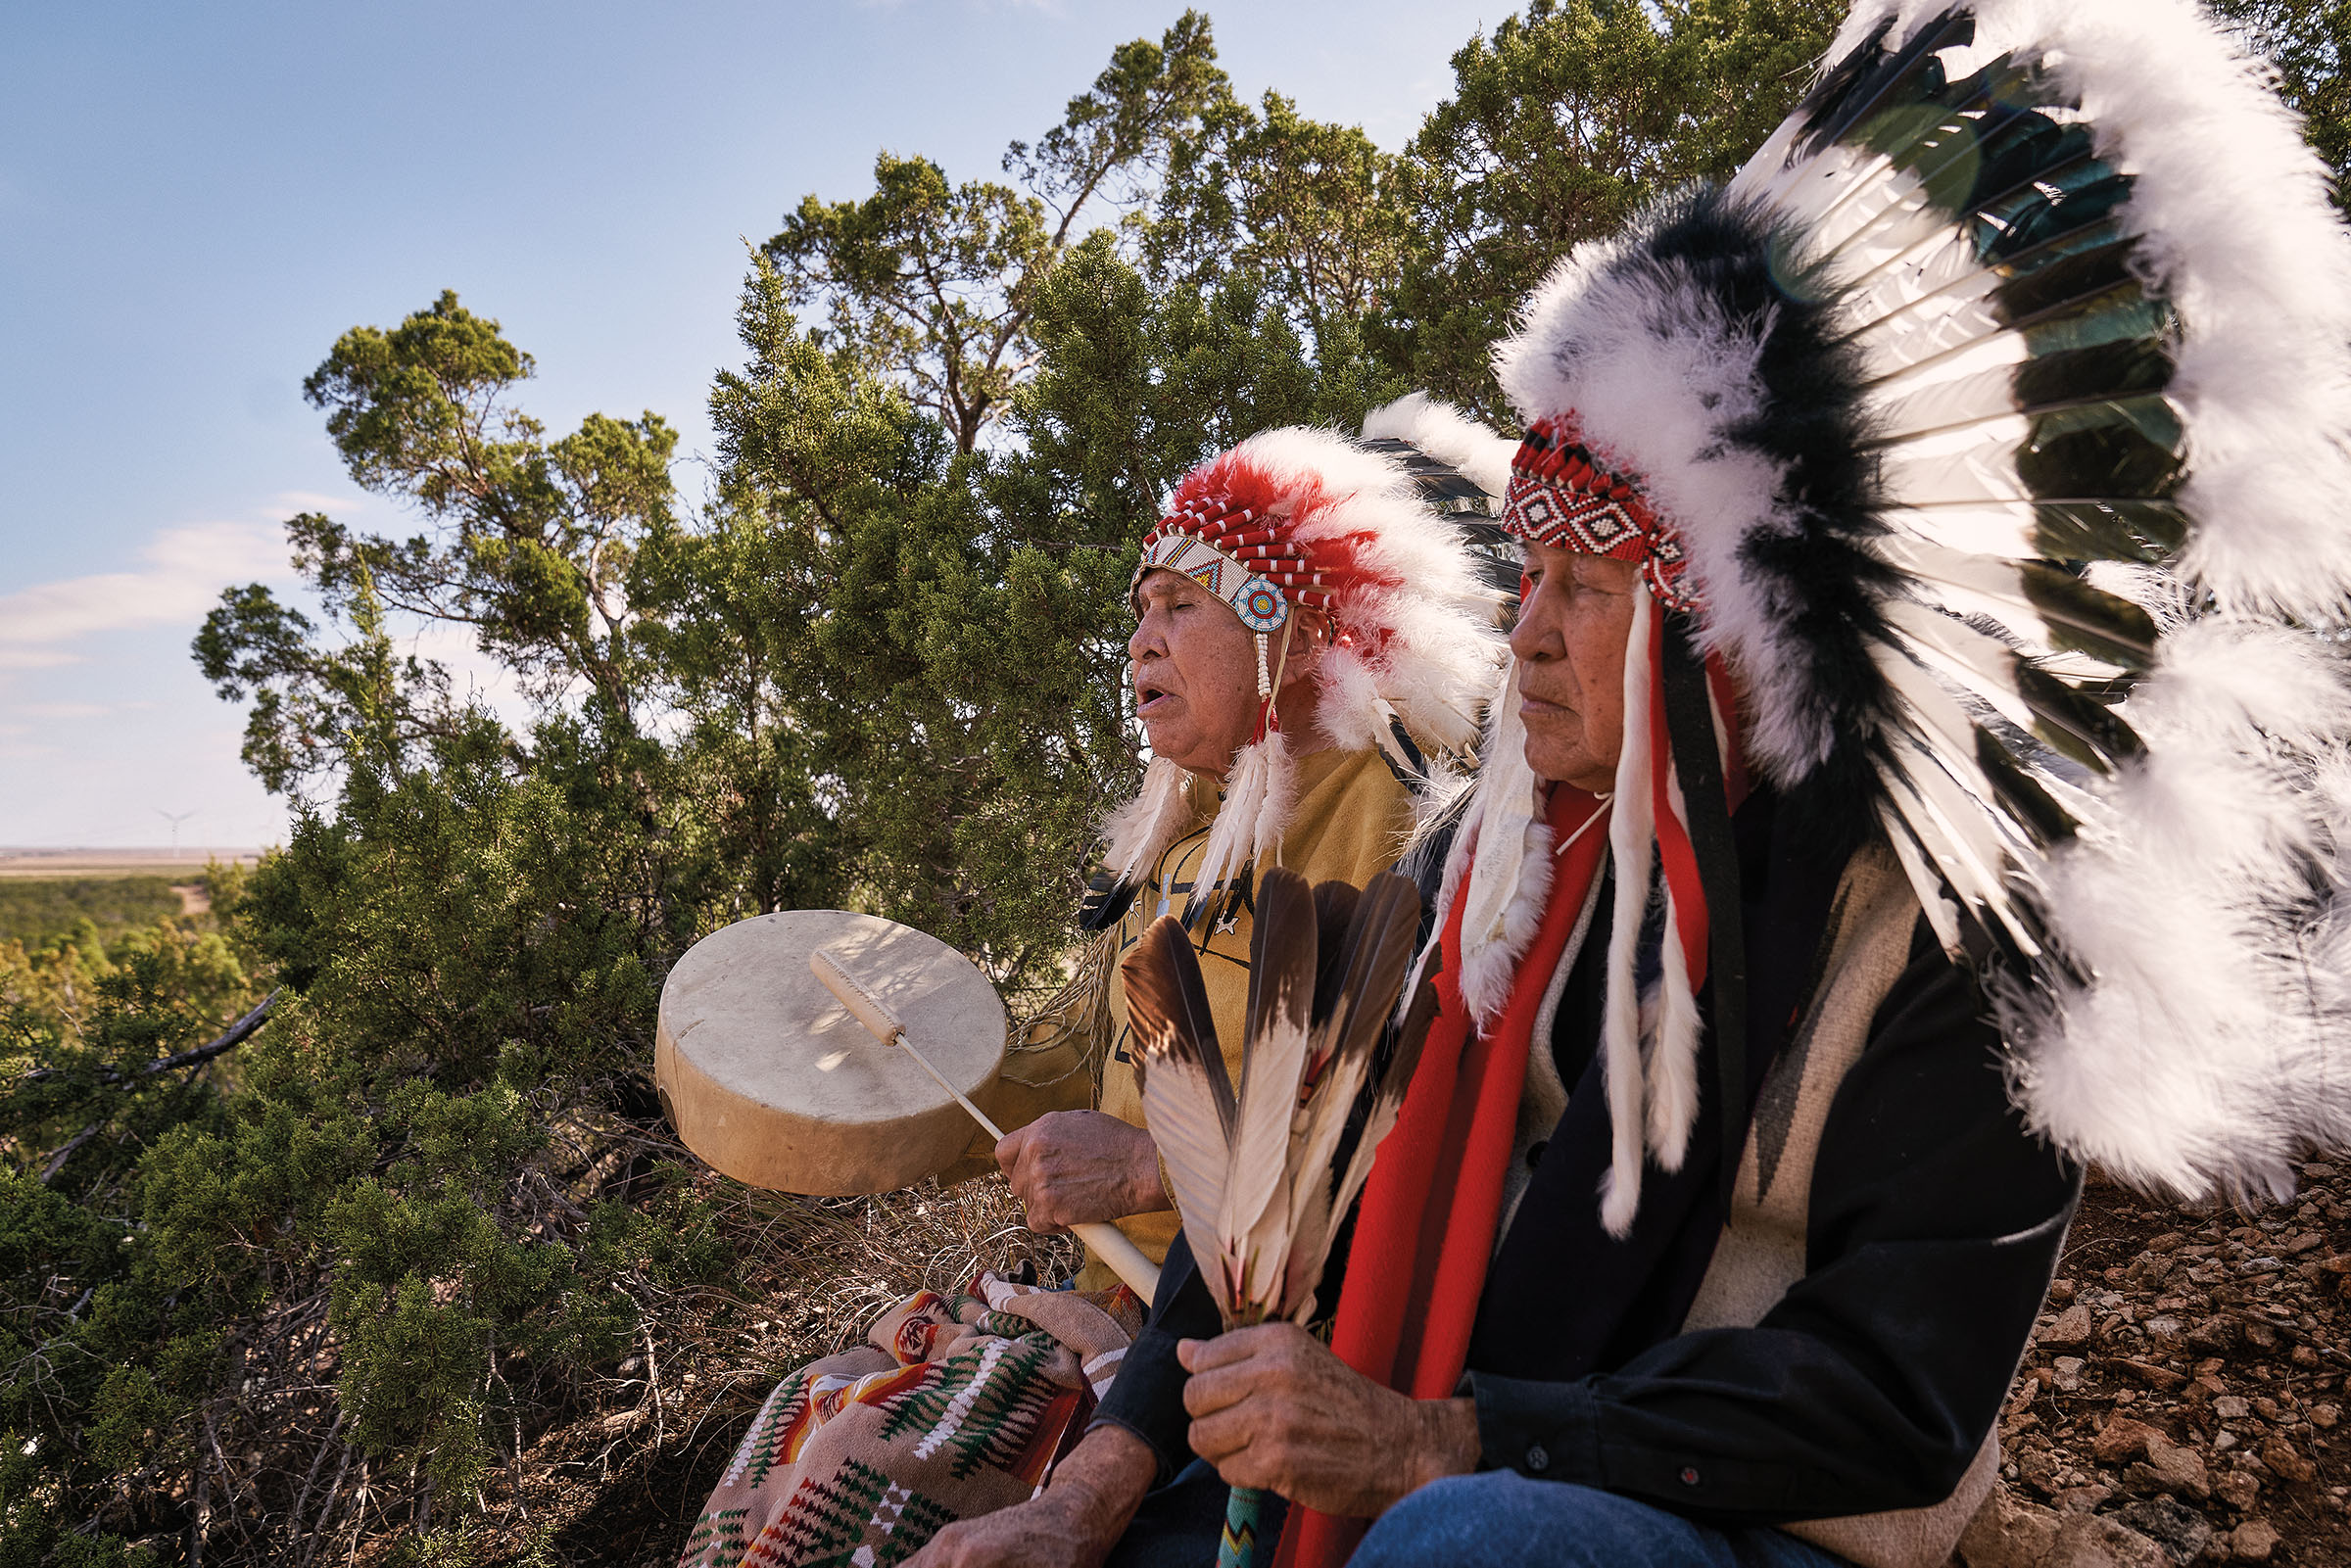 Two men in Native American attire including head dresses sit holding a drum and bundle of feathers, singing a song